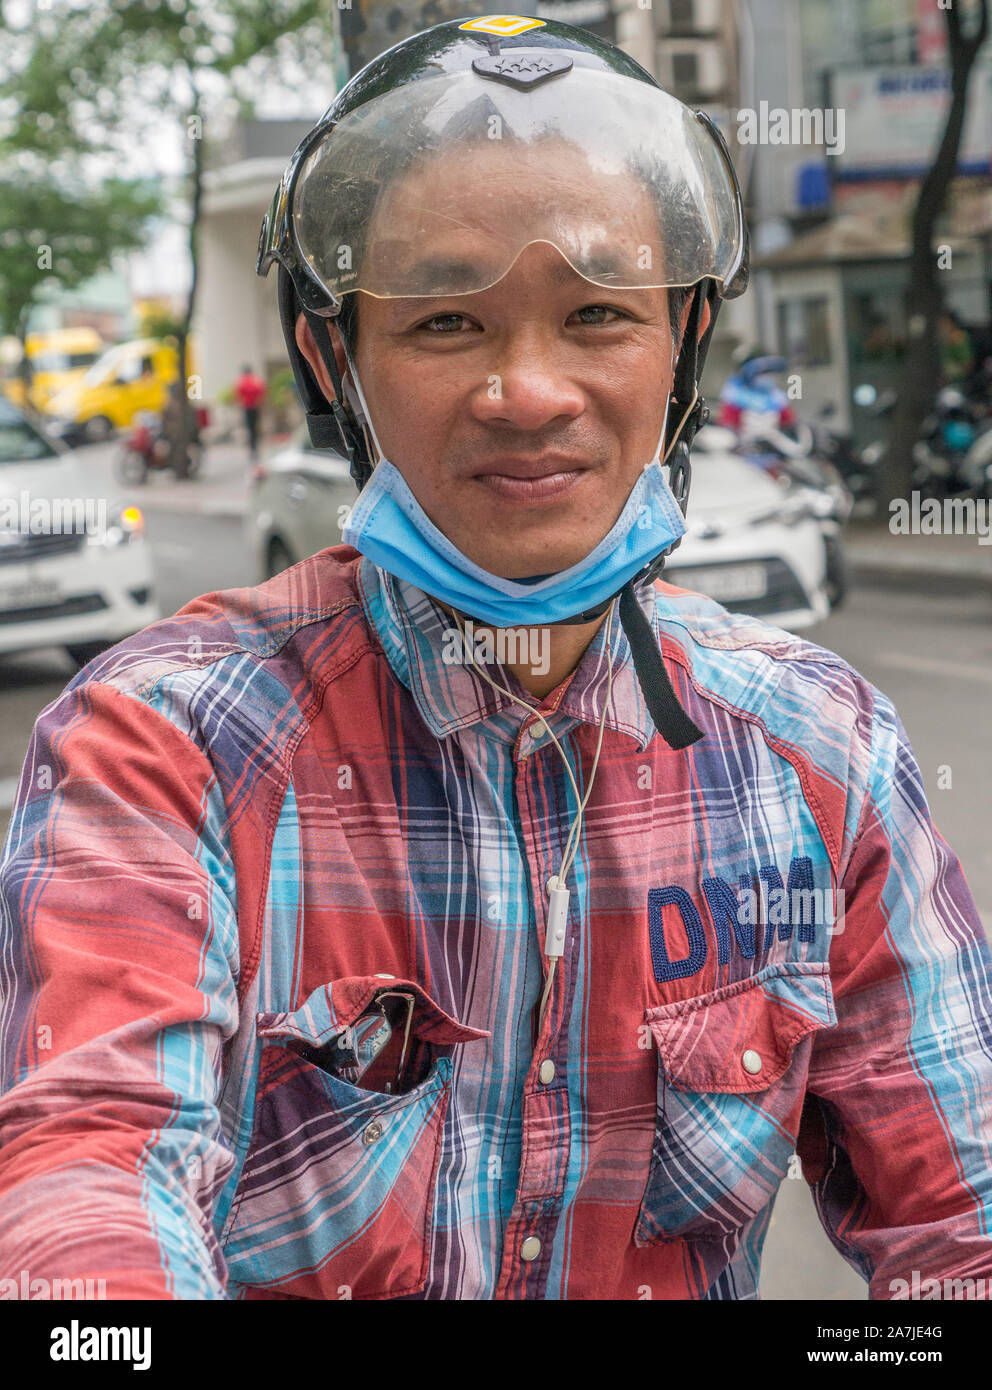 Horizontal portrait of young grinning male scooter driver wearing colorful red and blue checked shirt, black helmet with clear plastic visor. Stock Photo